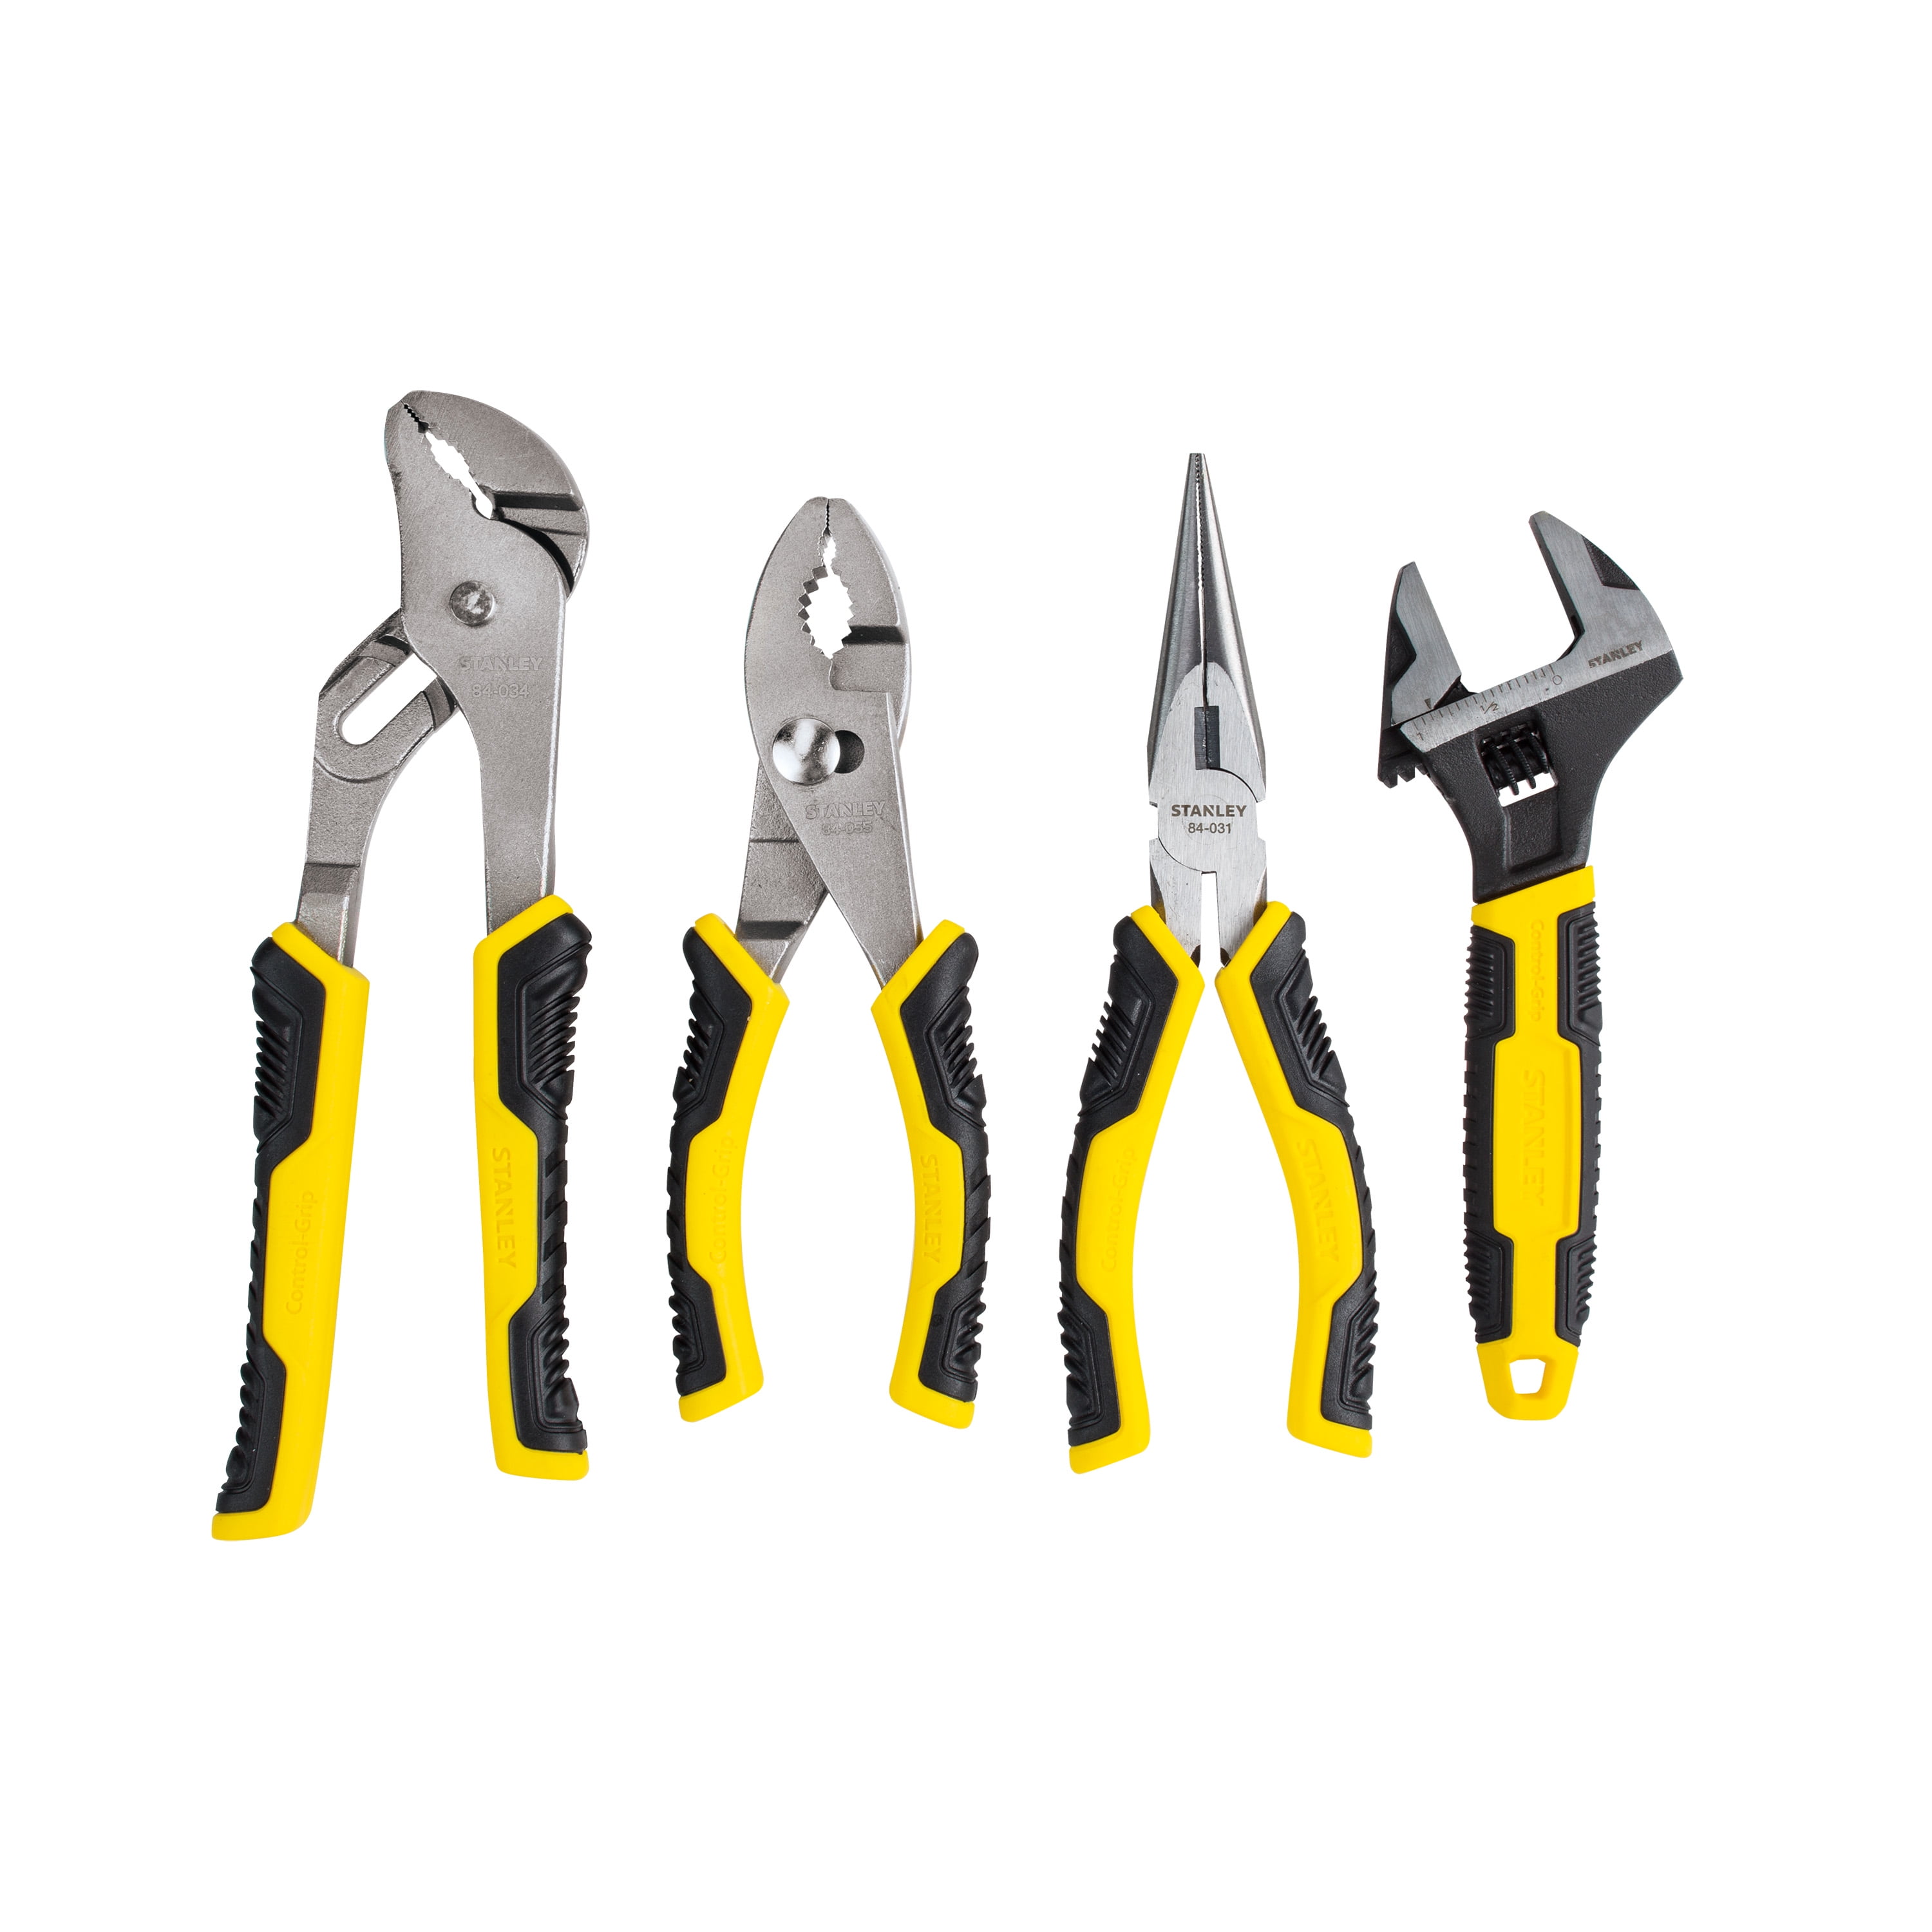 STANLEY 84-558 and 4-Piece Set Tool Plier Sets Wrench Adjustable